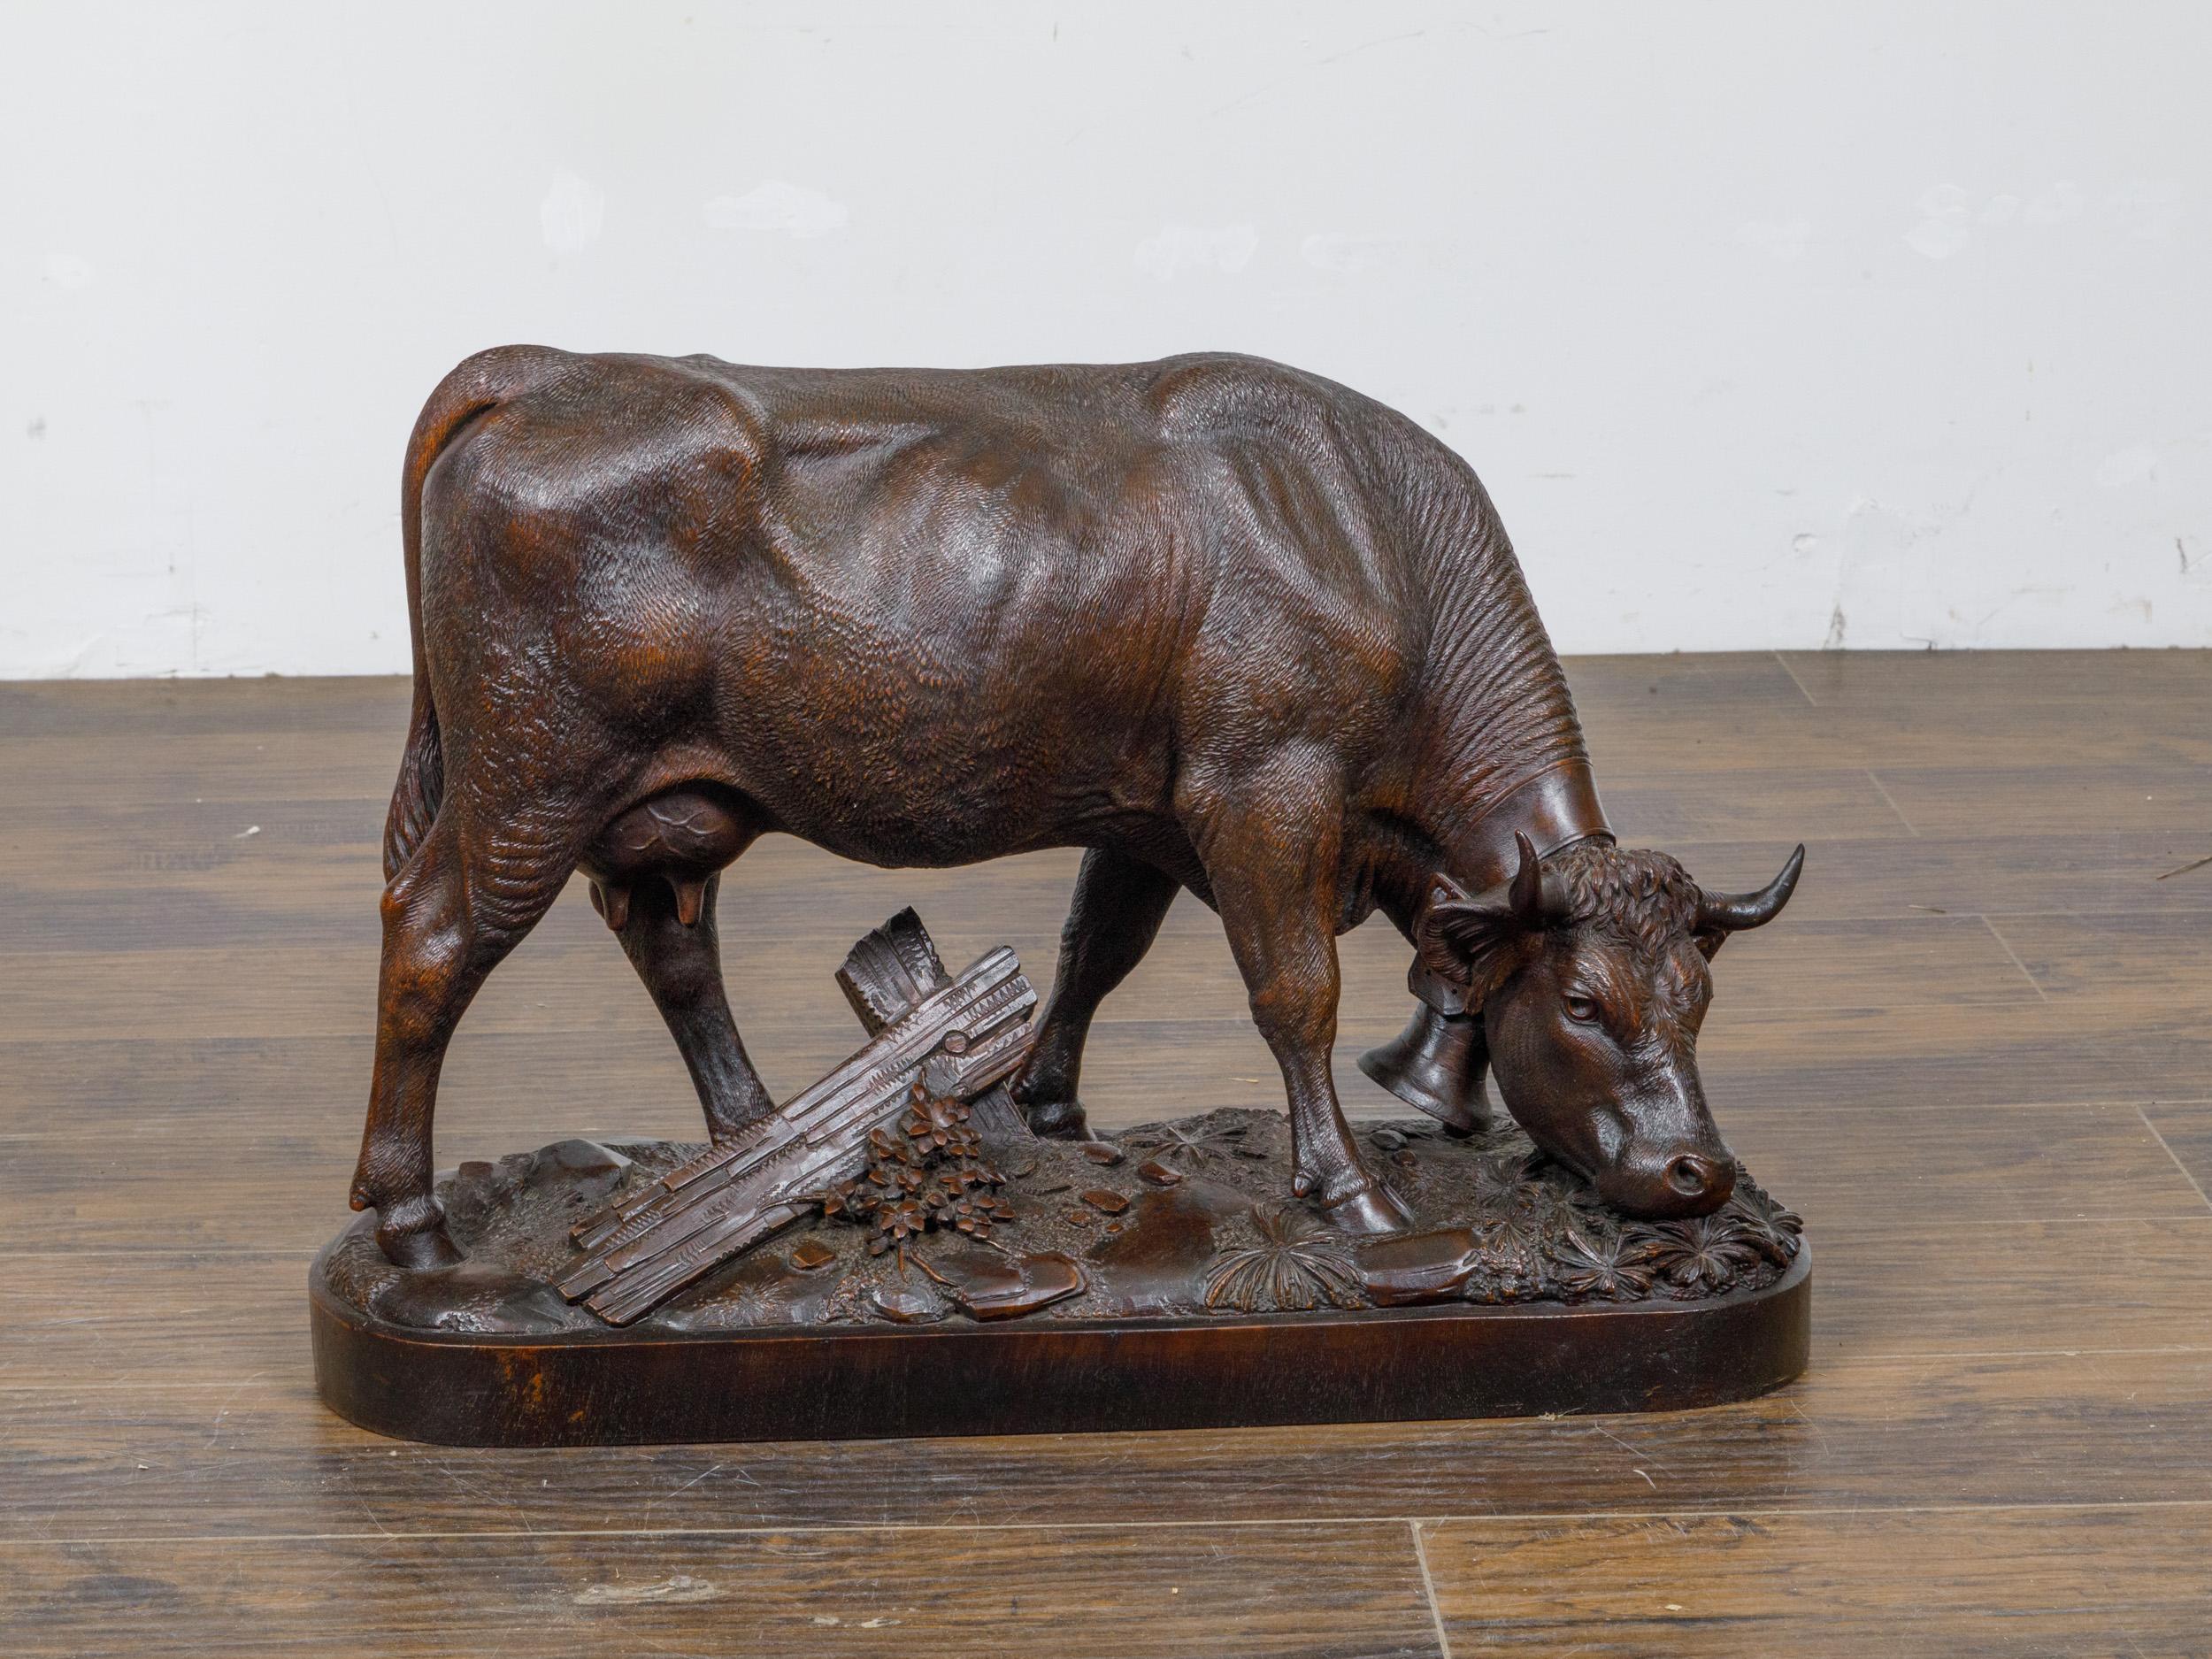 A Black Forest Swiss hand-carved wooden cow from circa 1880. This exquisitely hand-carved wooden cow is a pristine example of Black Forest artistry from circa 1880, originating from Switzerland. The sculpture depicts a grazing cow, its head